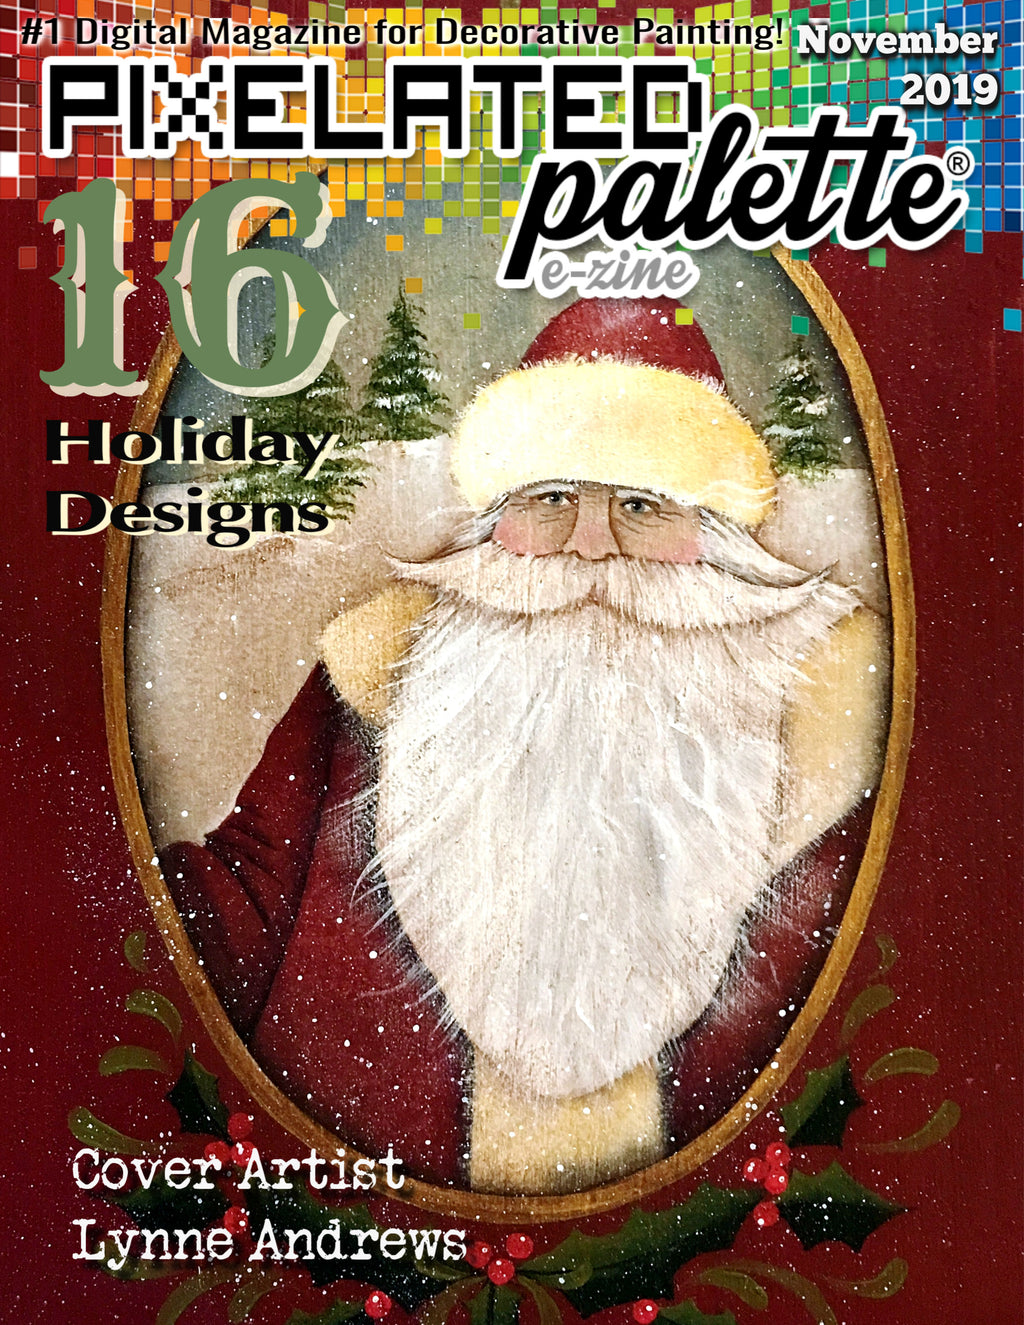 Pixelated Palette - November 2019 Issue Download